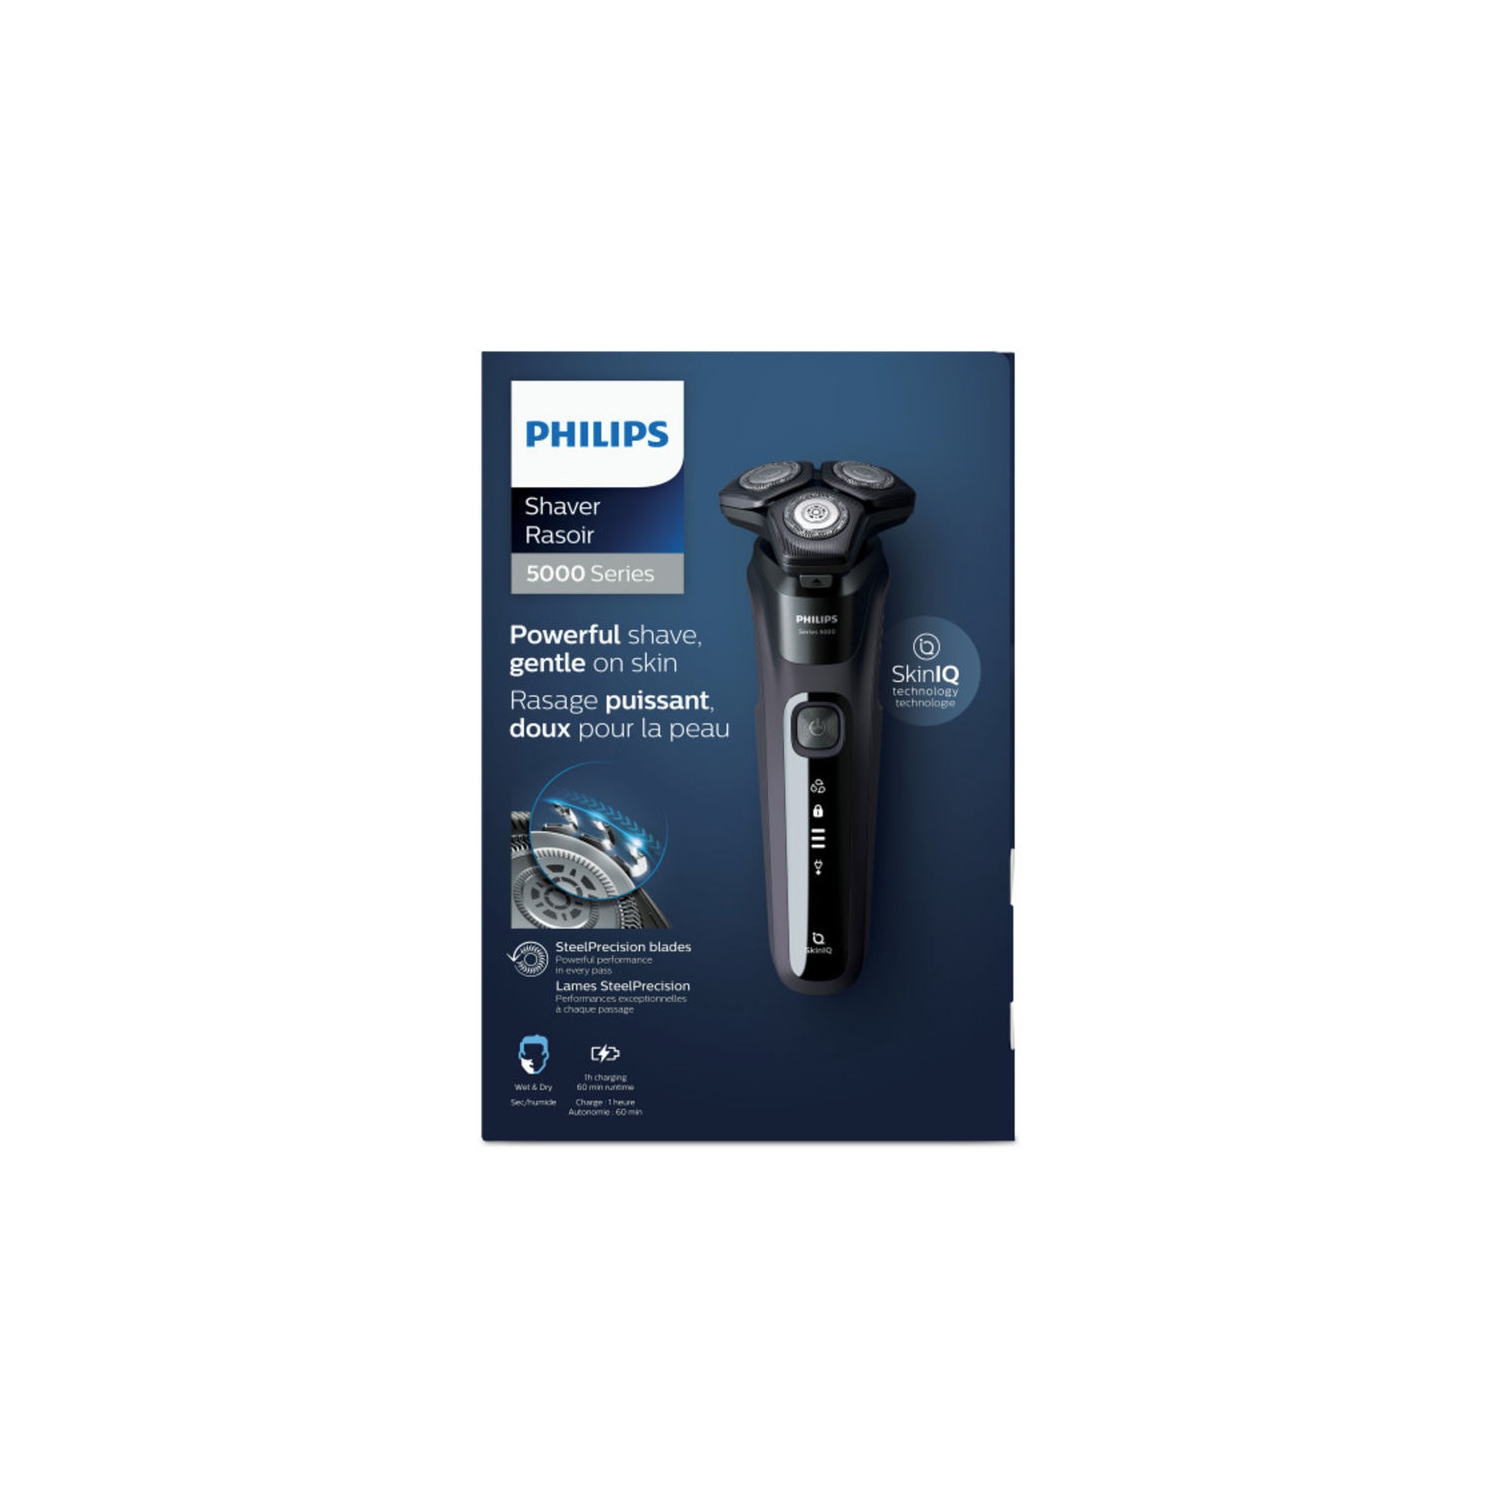 Philips Shaver Series 5000 | Wet and Dry - SkinIQ technology & SteelPrecision blades - S5588/25 - Midnight Blue